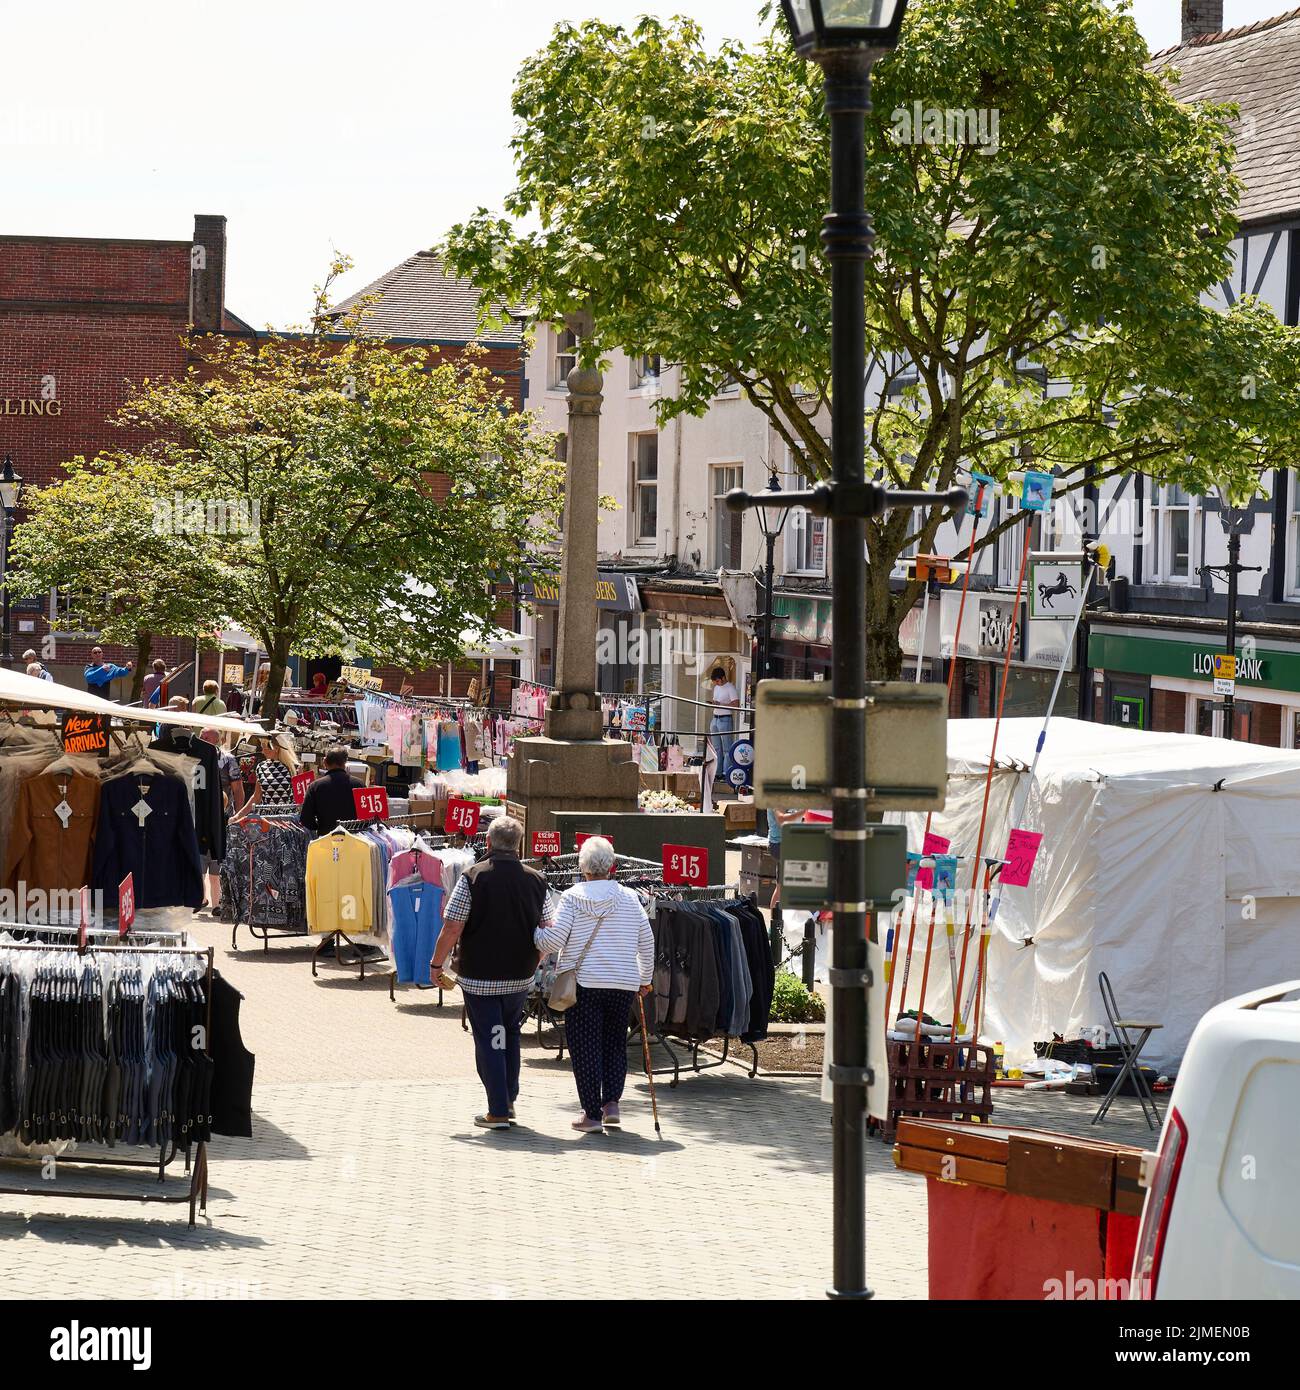 The weekly market held in the town square at Poulton-Le-fylde Stock Photo